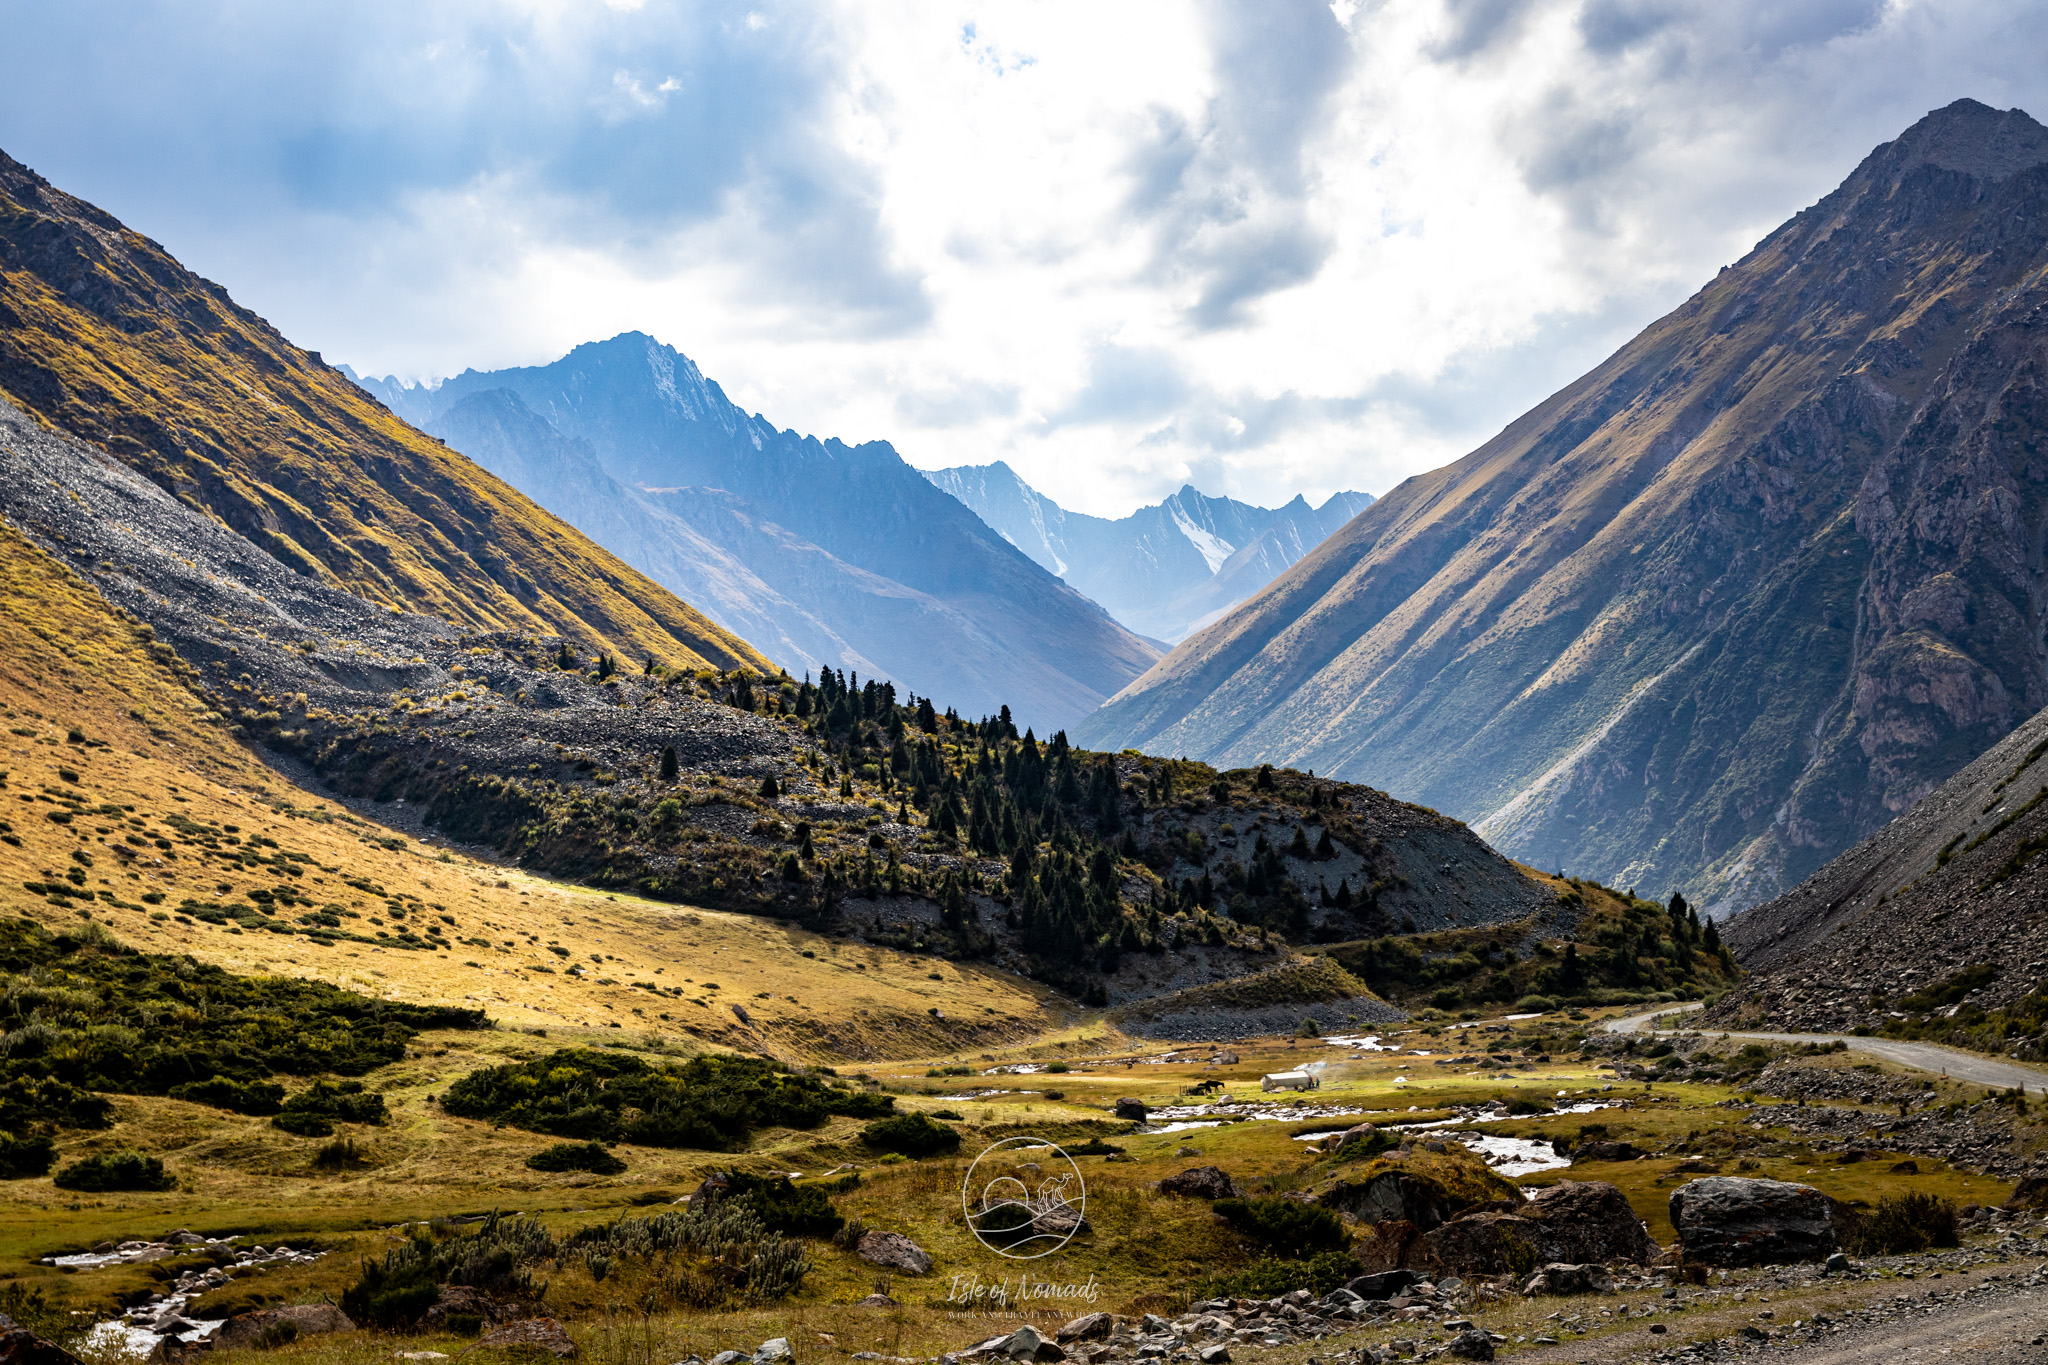 The natural beauty of Kyrgyzstan will take your breath away